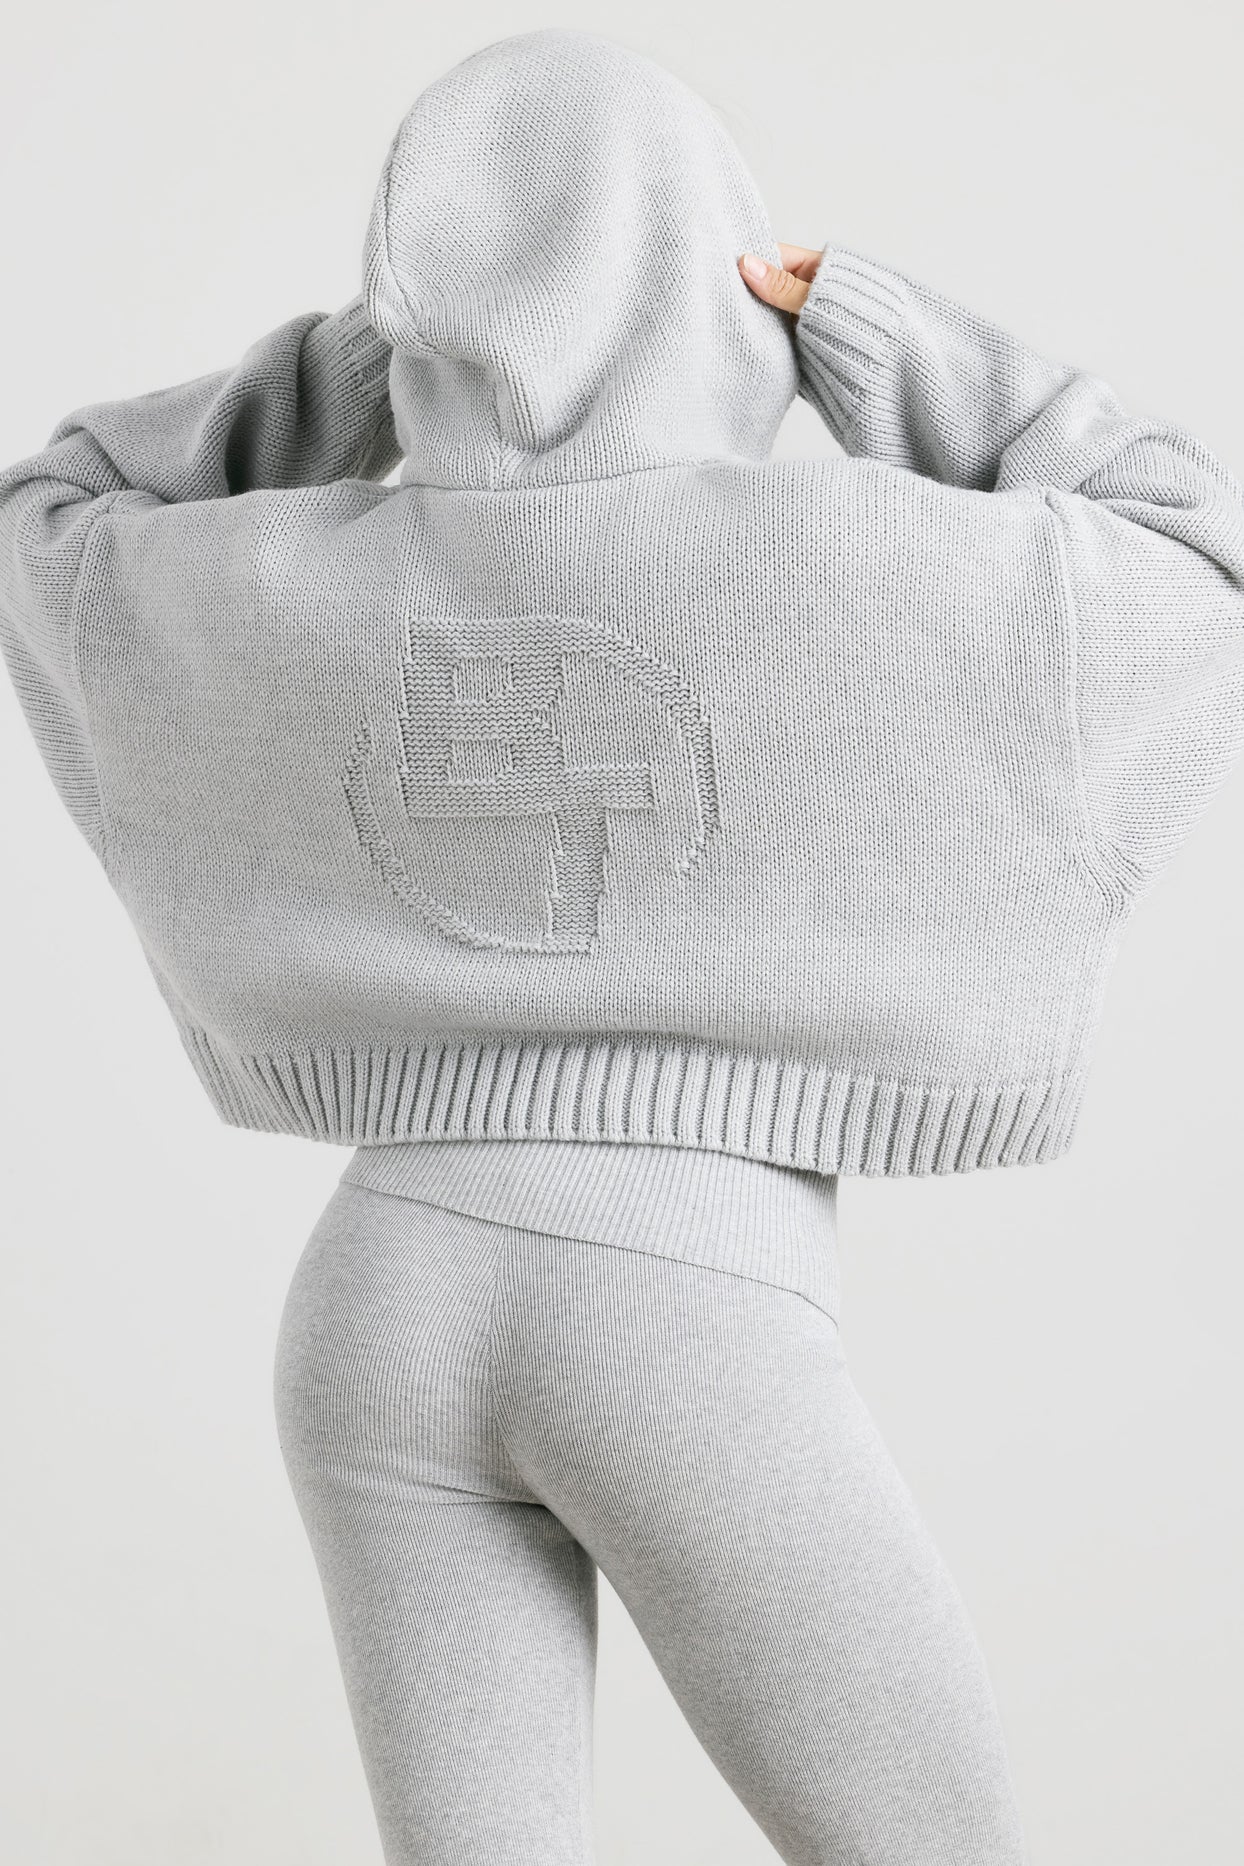 Cropped Zip Up Chunky Knit Hoodie in Heather Grey